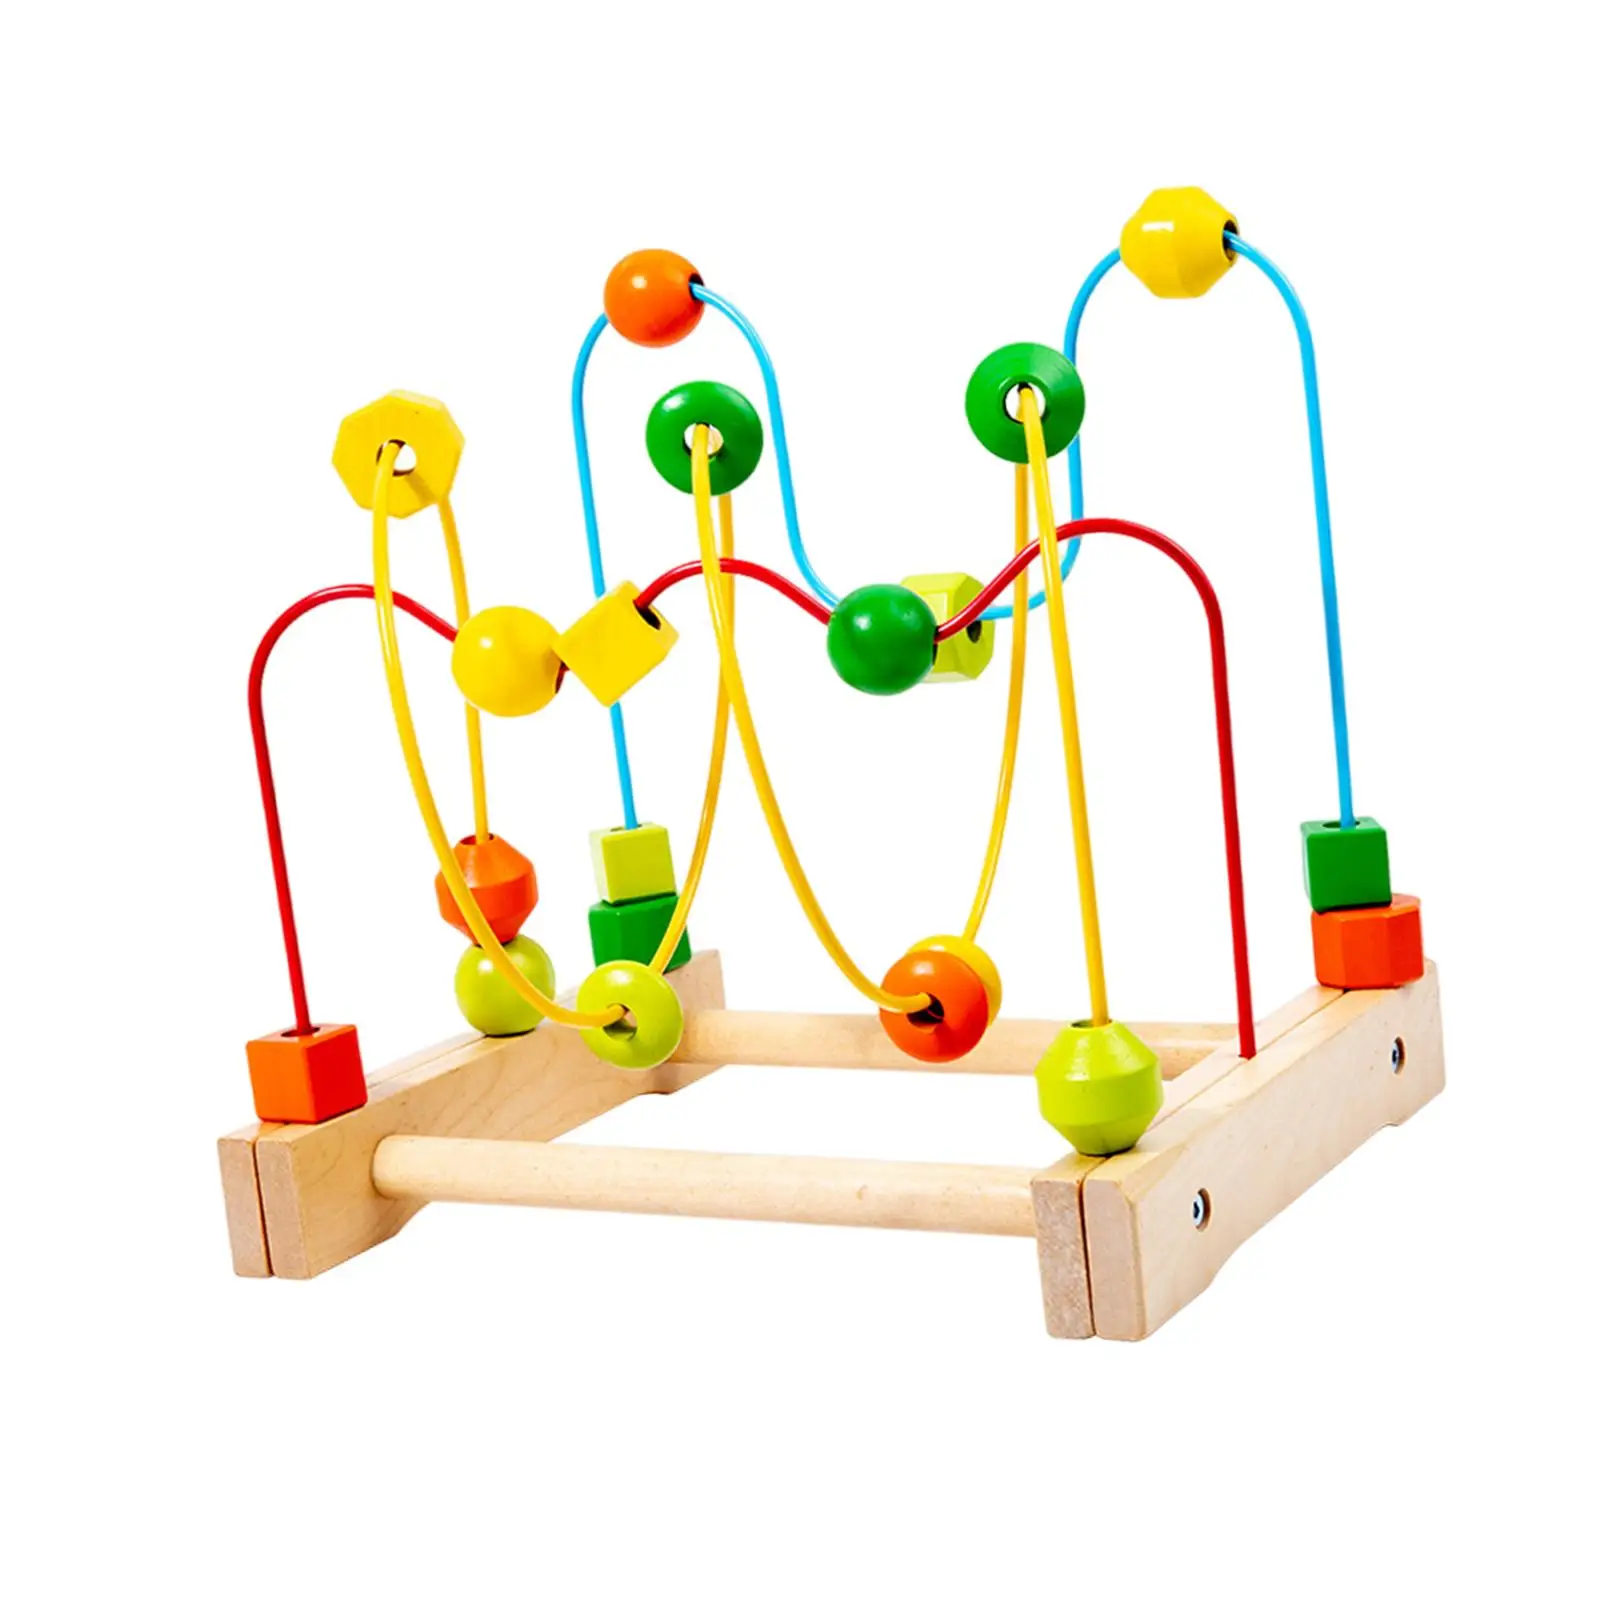 Beaded Toy Hand Eye Coordination Motor Skills Bead Maze Toy for Baby